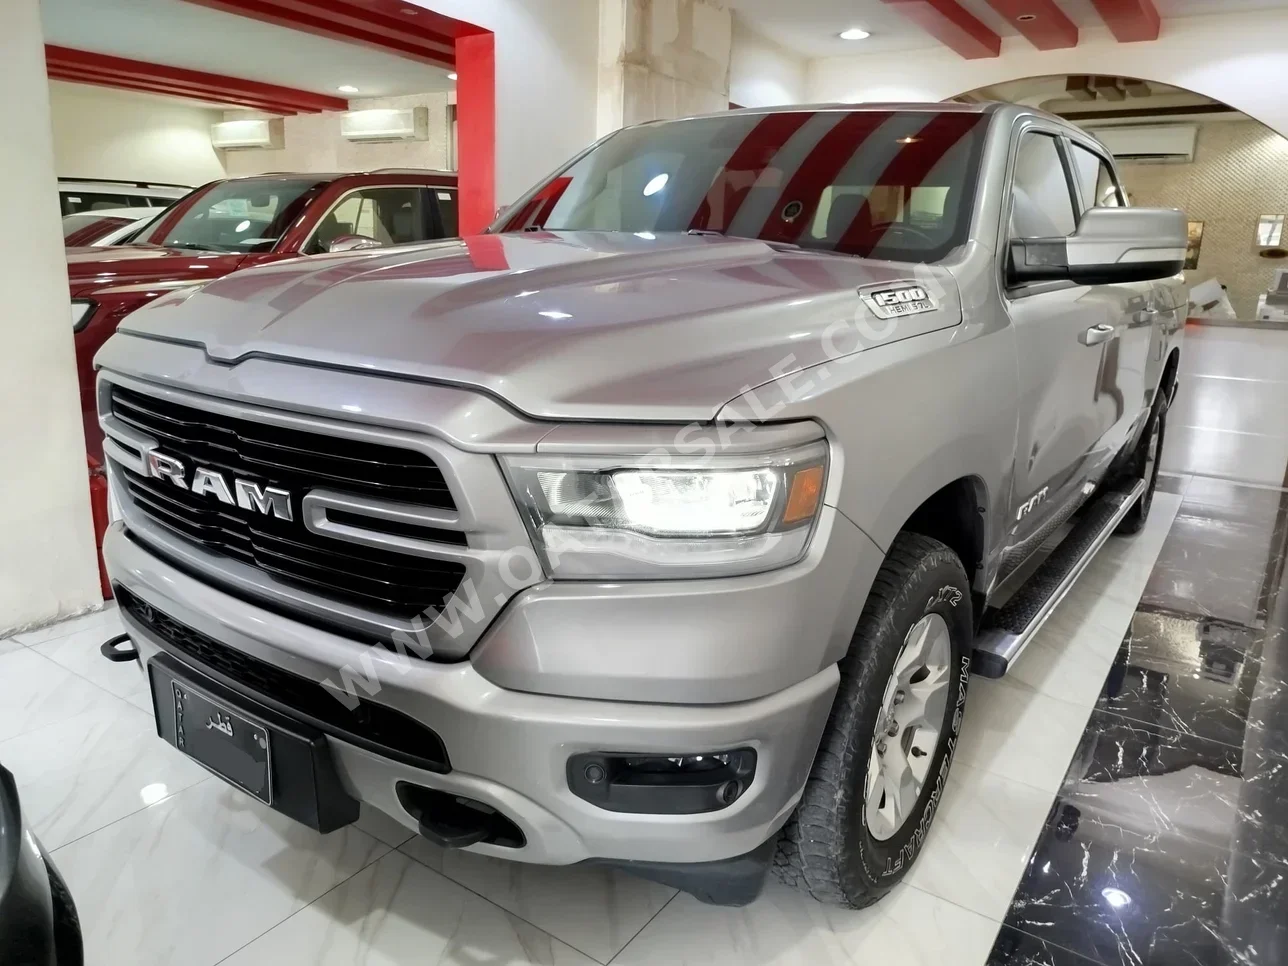 Dodge  Ram  Big Horn  2020  Automatic  62,000 Km  8 Cylinder  Four Wheel Drive (4WD)  Pick Up  Silver  With Warranty